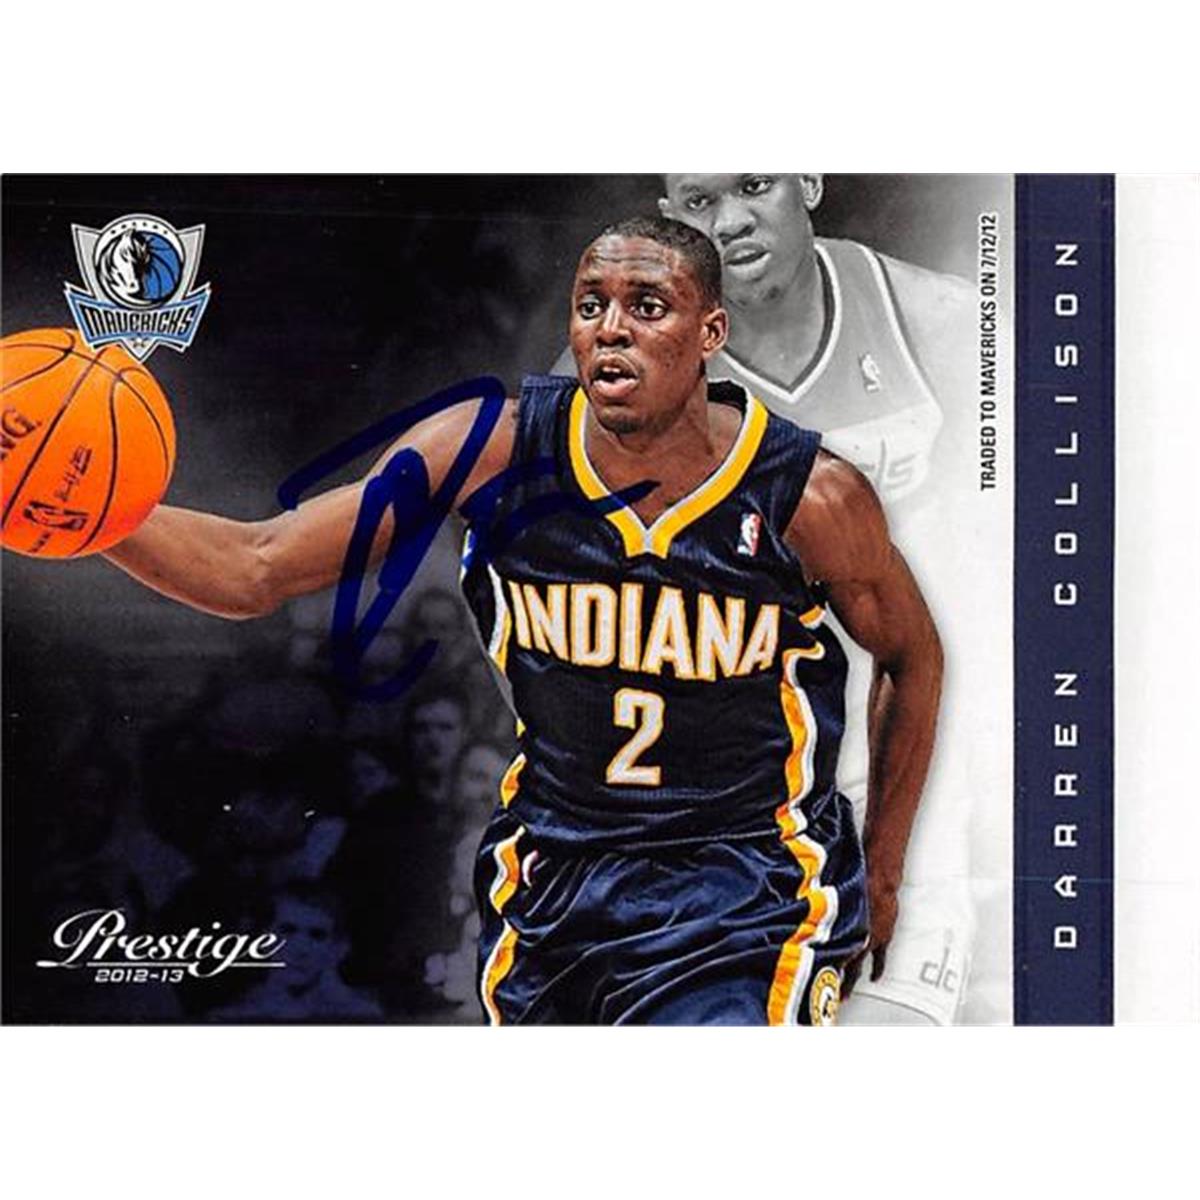 Picture of Autograph Warehouse 444490 Indiana Pacers 2012 Panini Prestige 27 Darren Collison Autographed Basketball Card